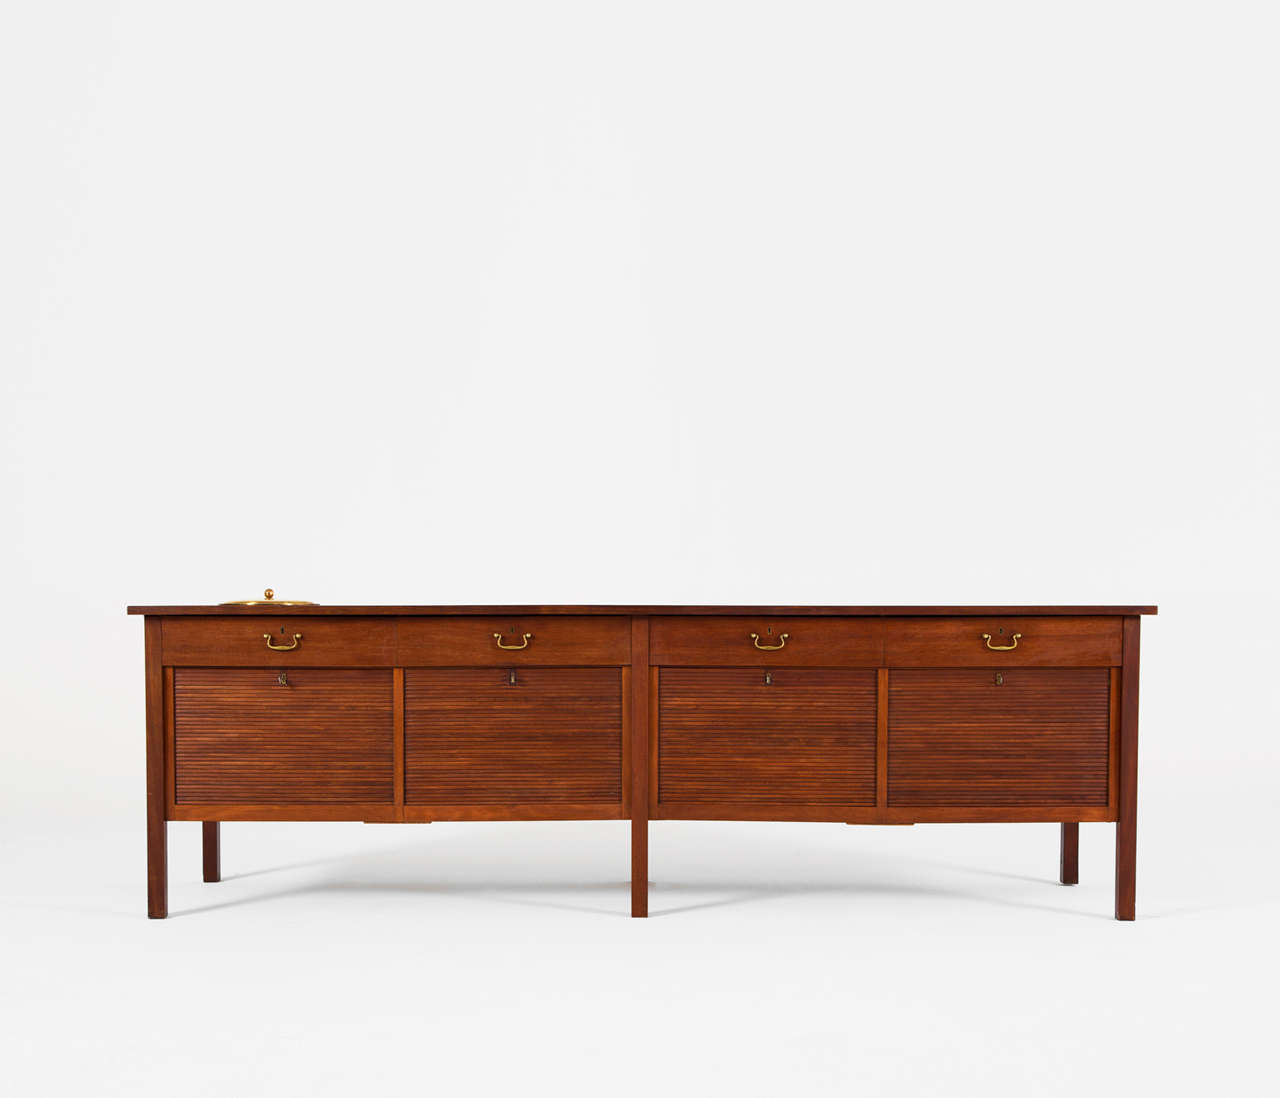 Rare cabinet by Preben Hansen, made by Cabinet maker Peter Petersen (1930's / 1940's) in teak, with 4 vertical tambour doors, and 4 drawers which are accommodate with nicely patented brass grips. The special feature of this credenza is the built in